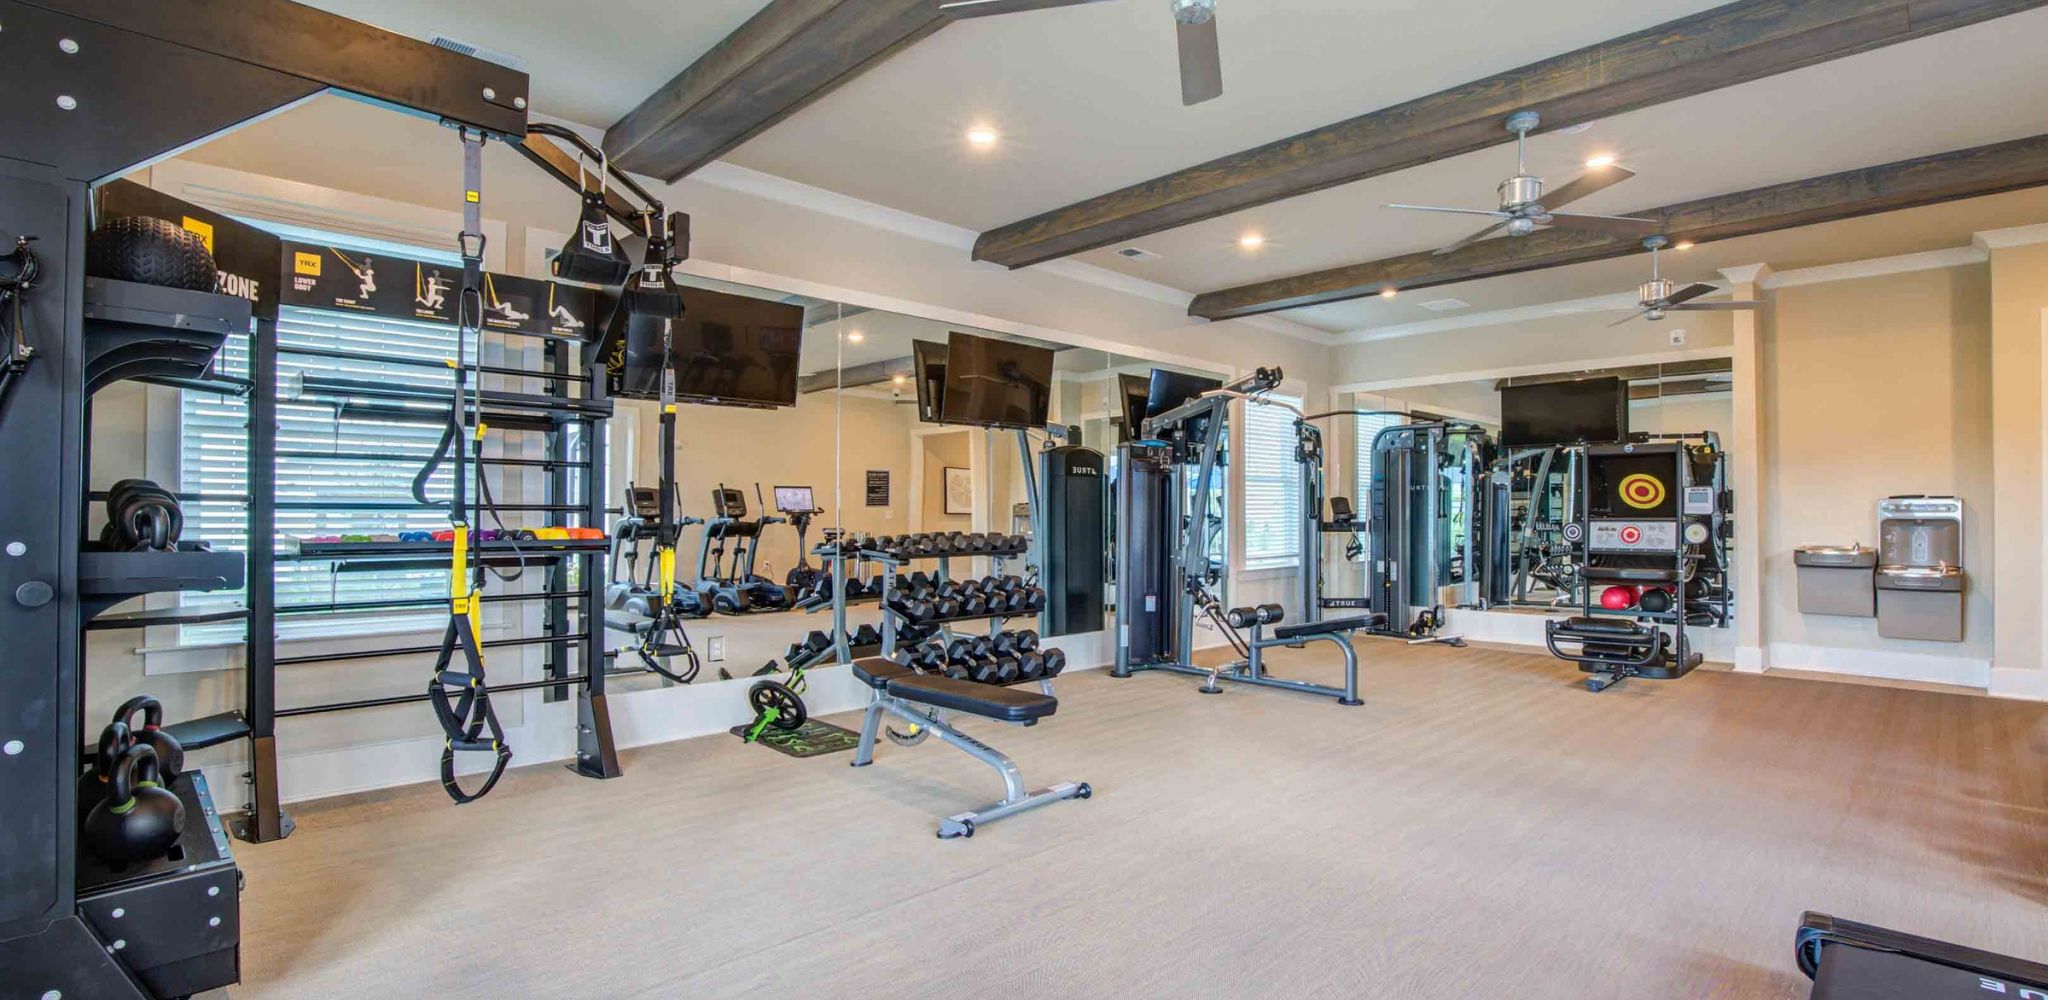 Hawthorne at the Pointe resident fitness center amenity with strength training equipment and cardio machines